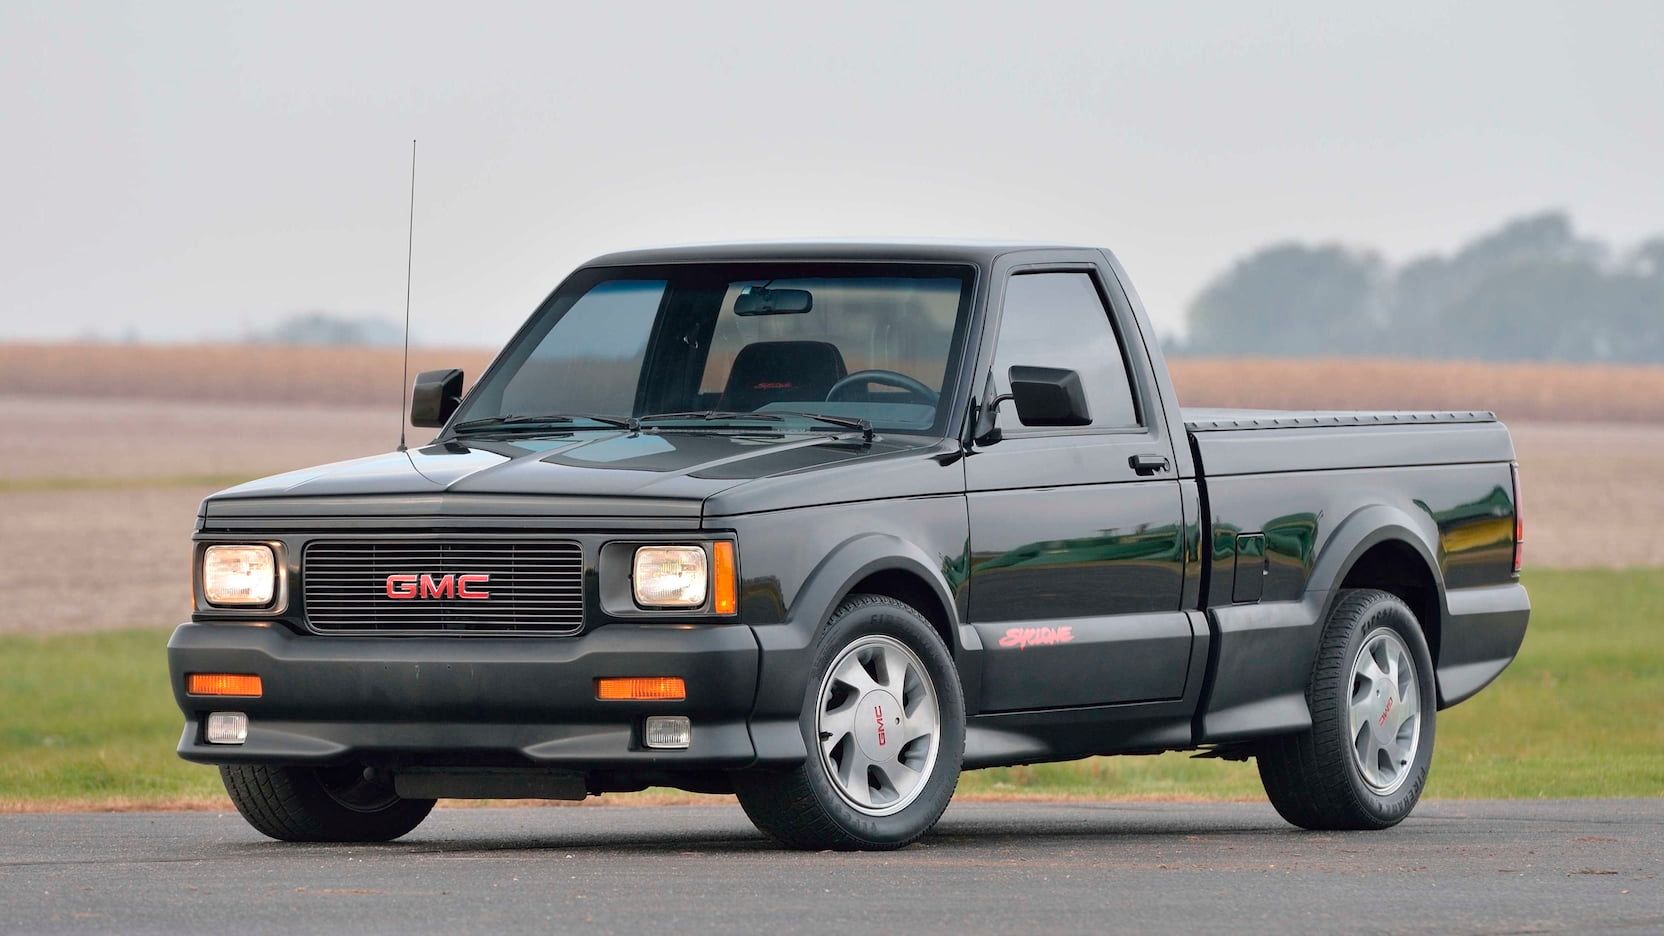 1991 GMC Syclone Parked On Road